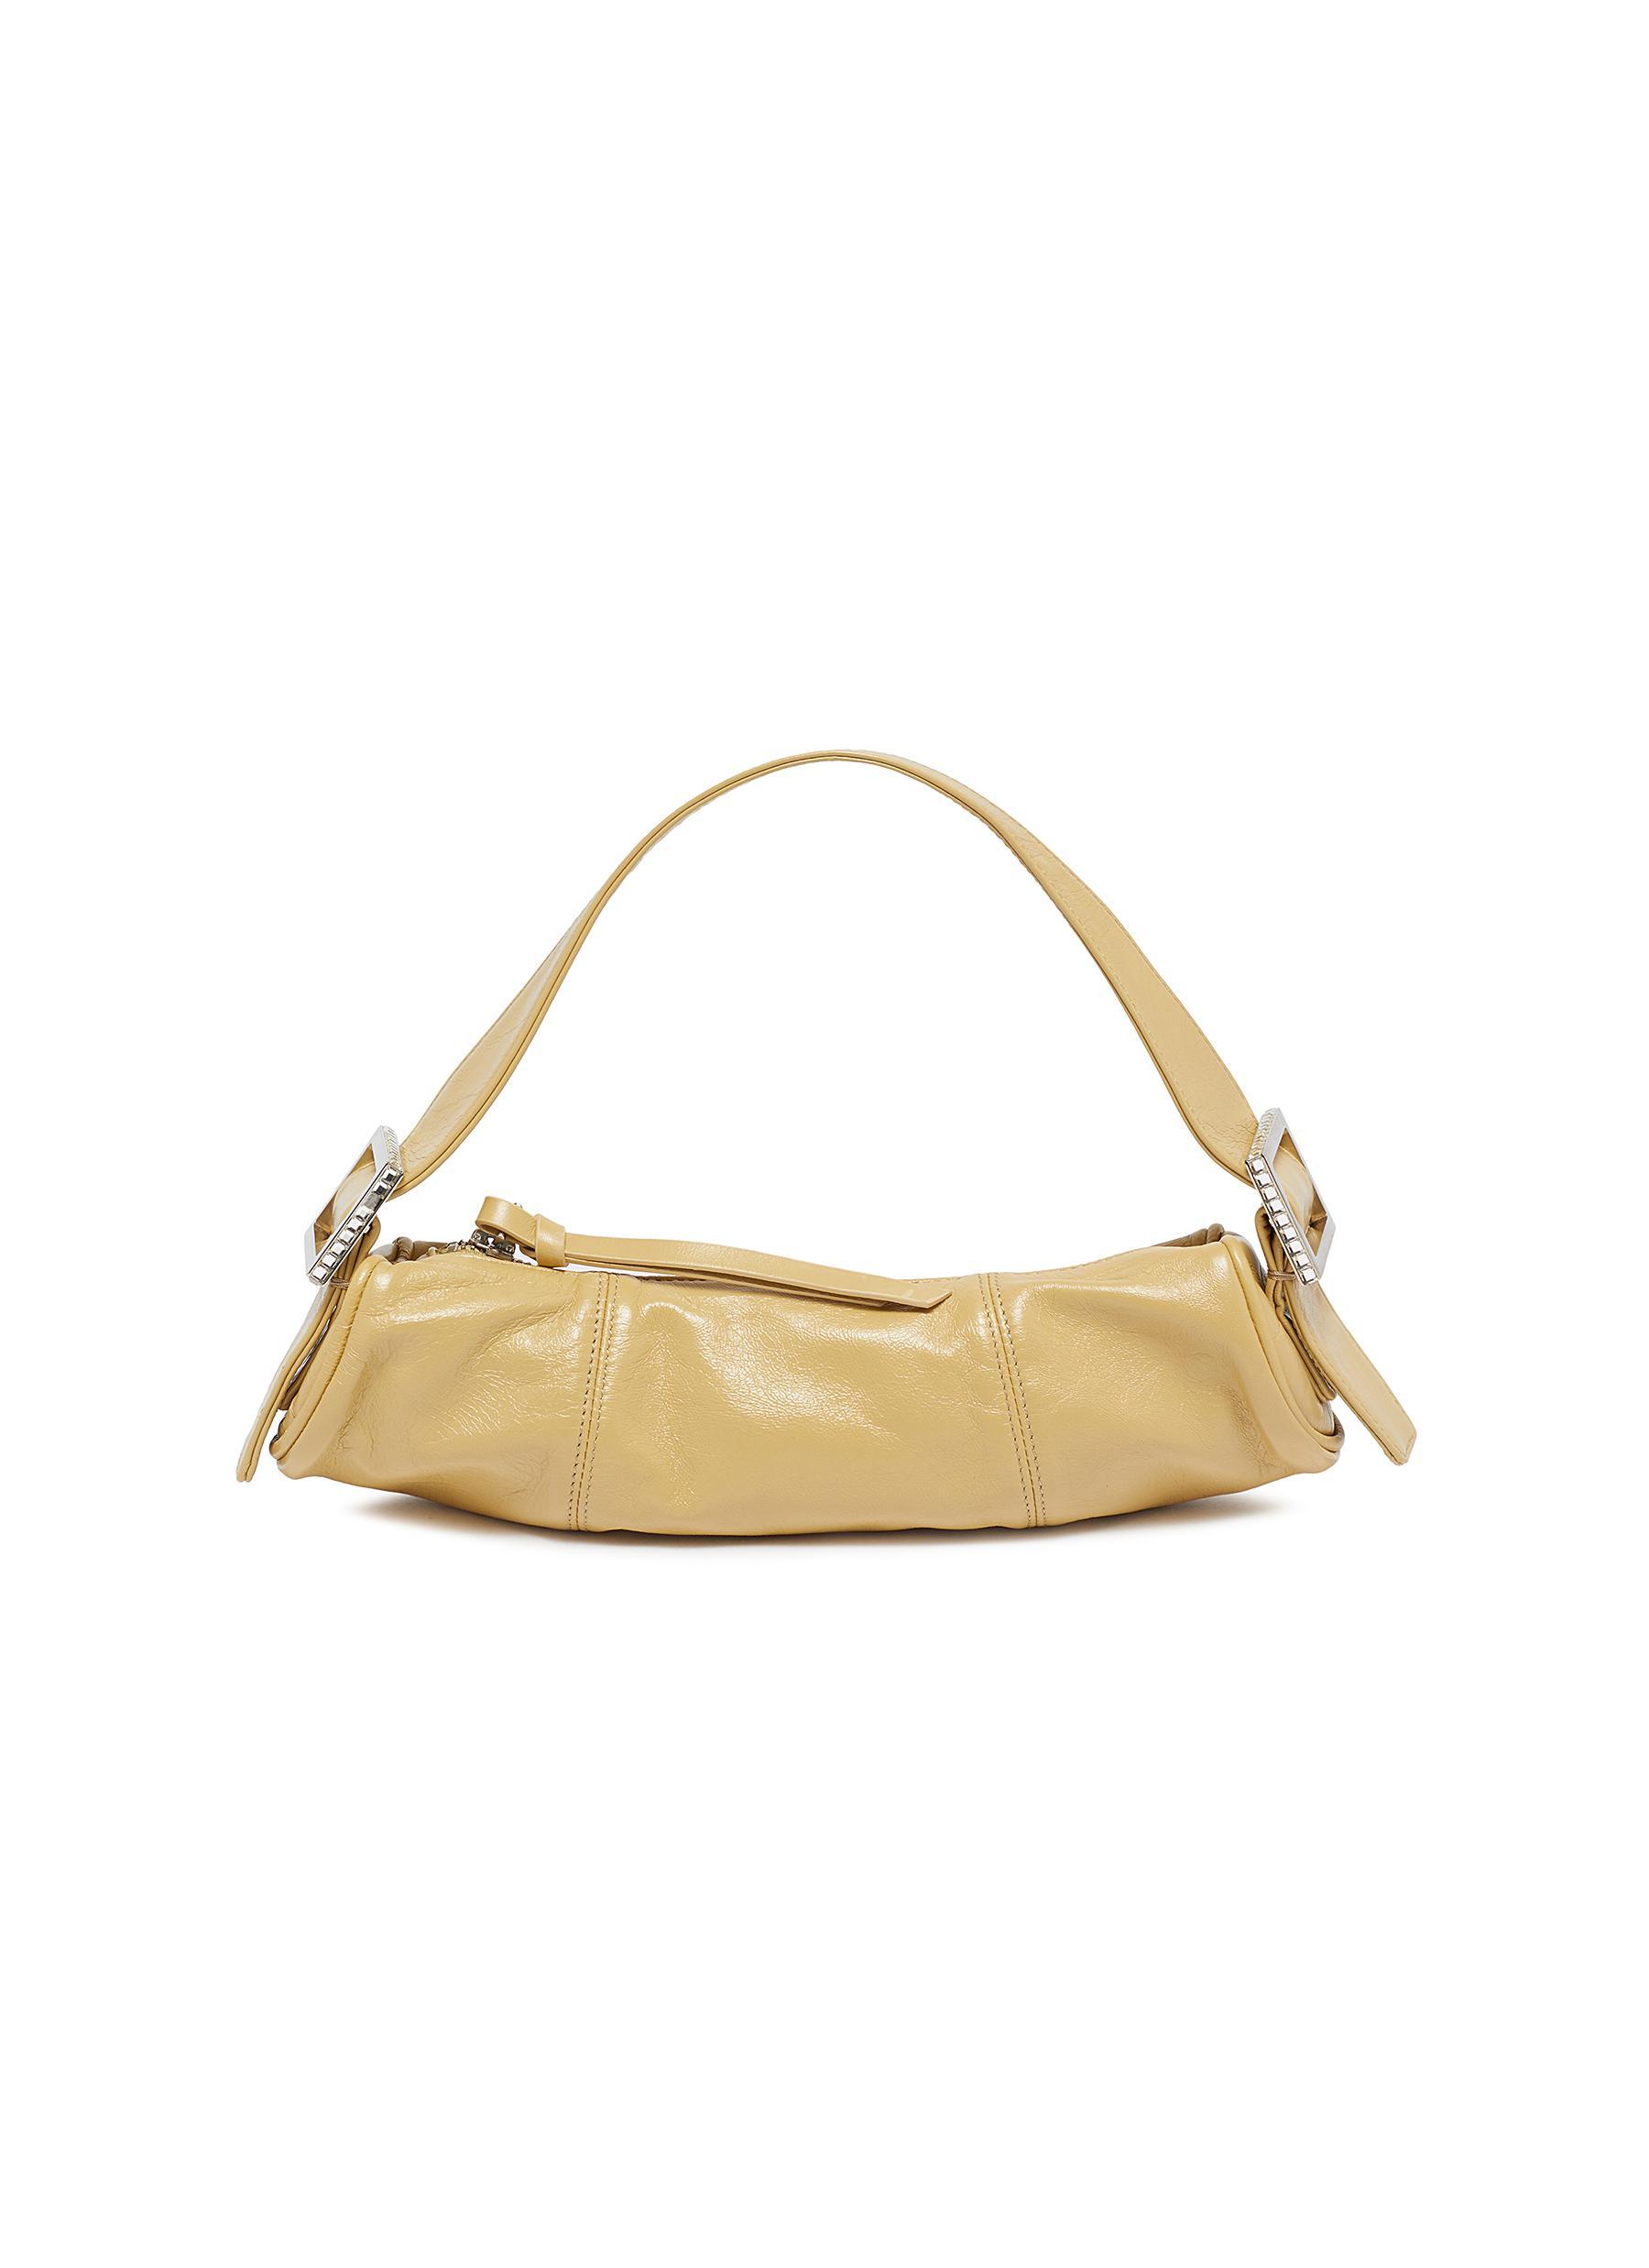 BY FAR 'kubi' Crystal Buckle Leather Baguette Bag in Yellow